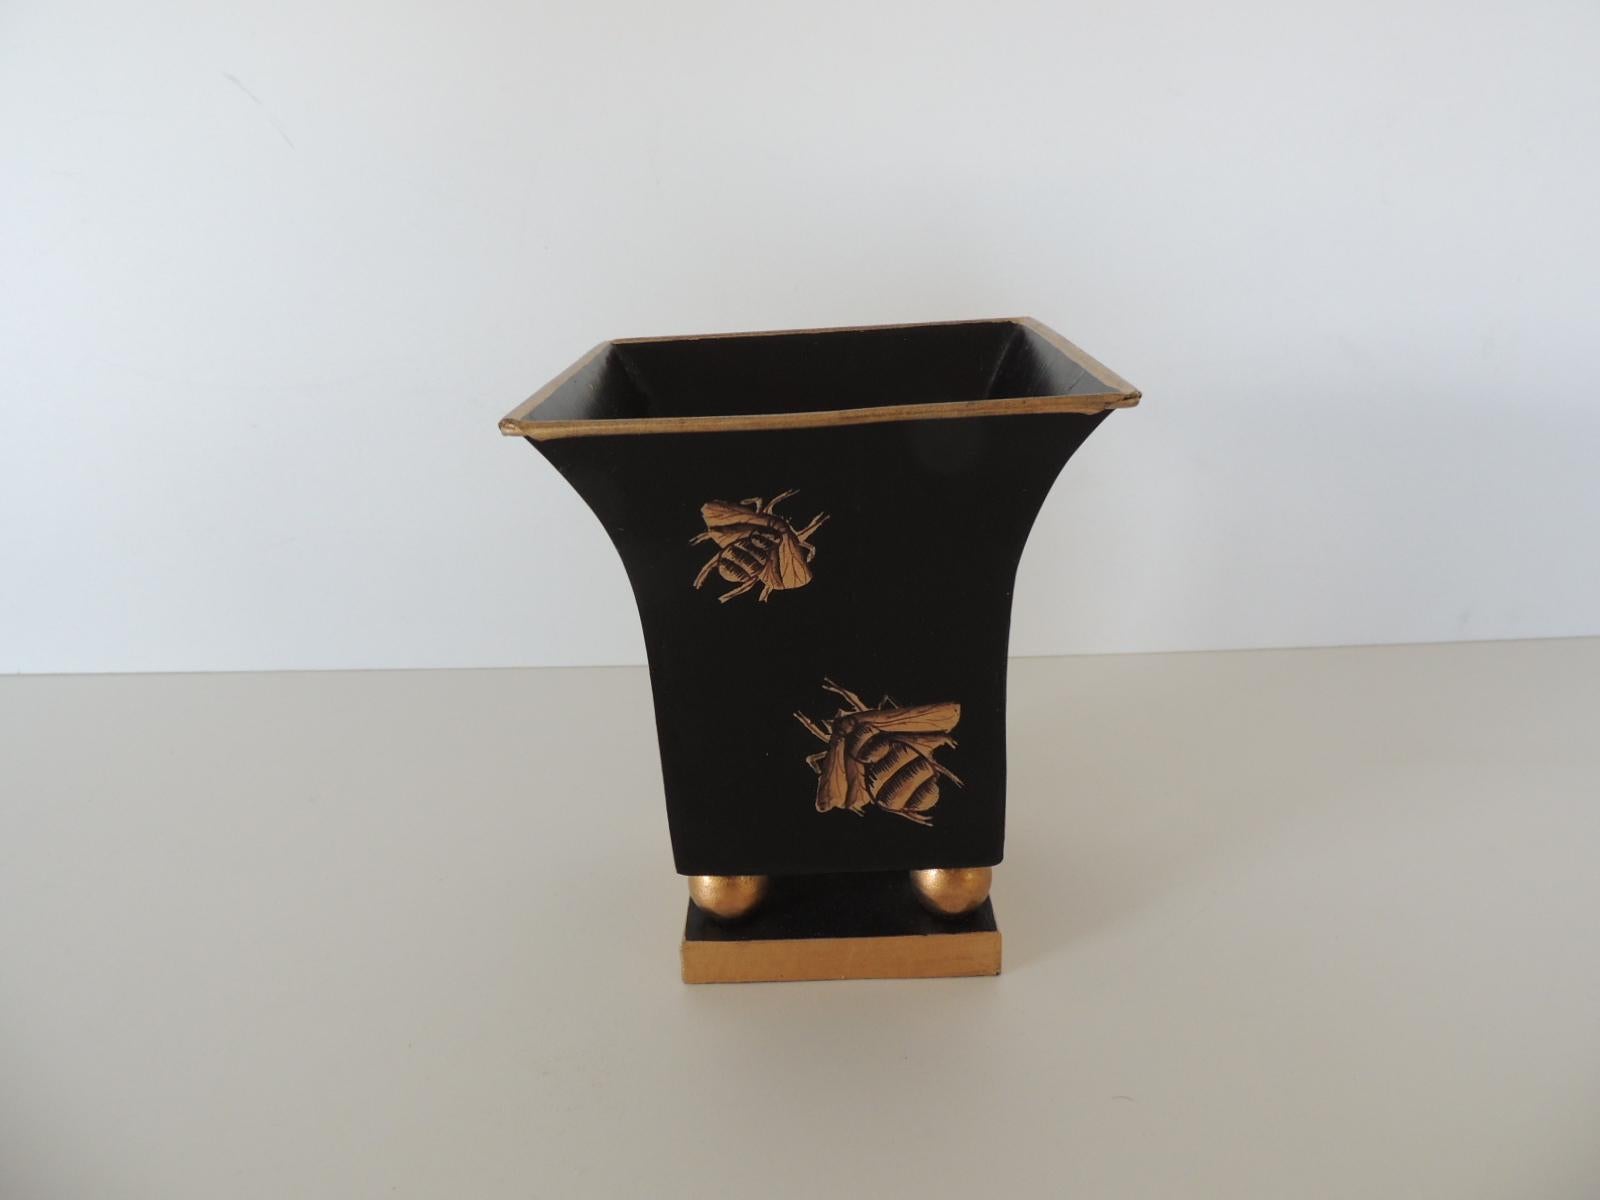 Black and gold tole petite catchpot with bees
Size: 5